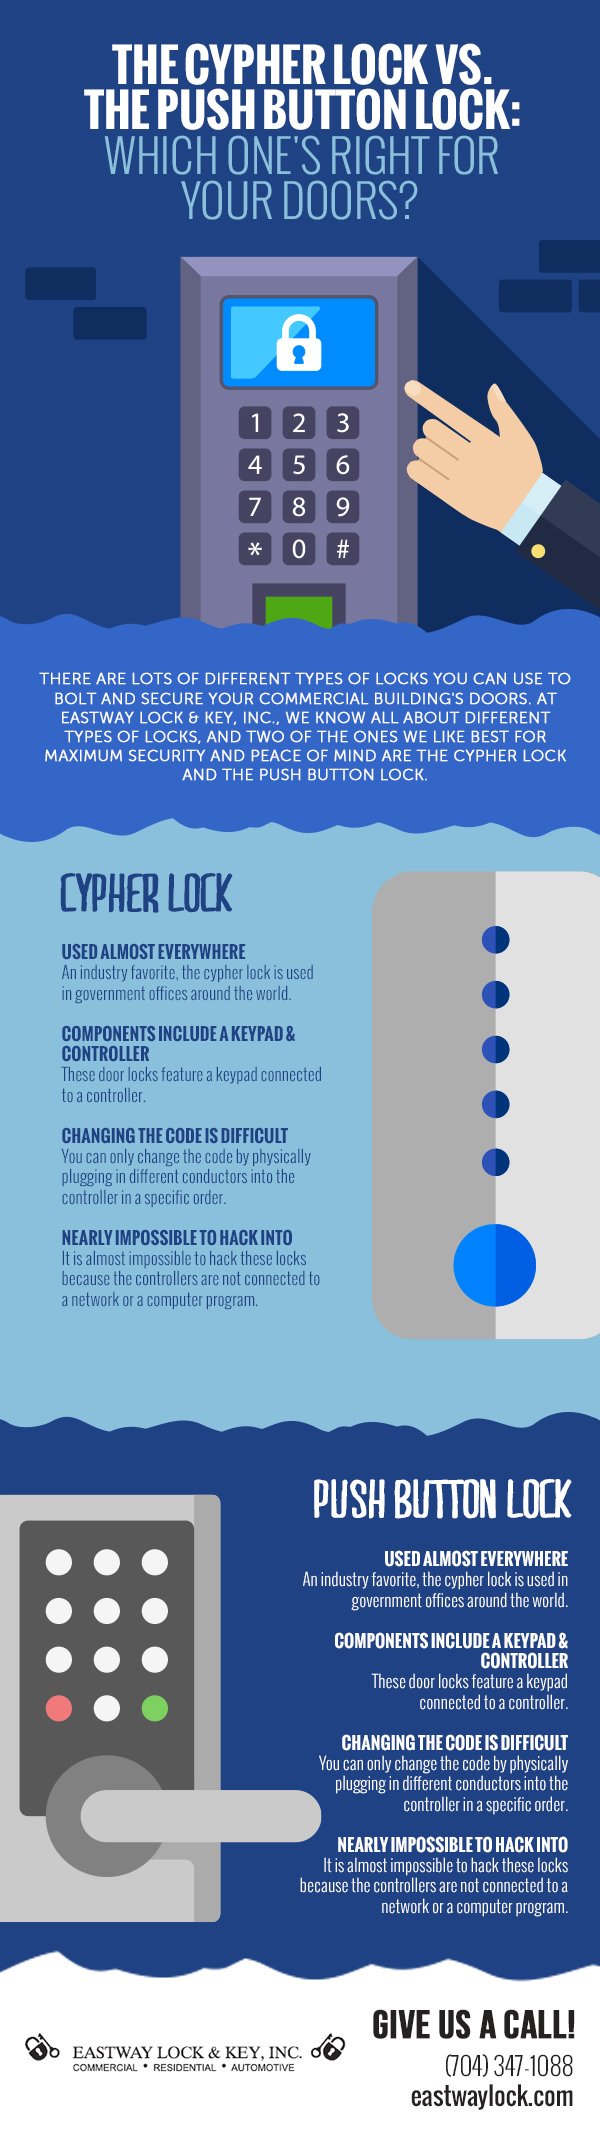 The Cypher lock vs. the push button lock: Which one's right for your doors?